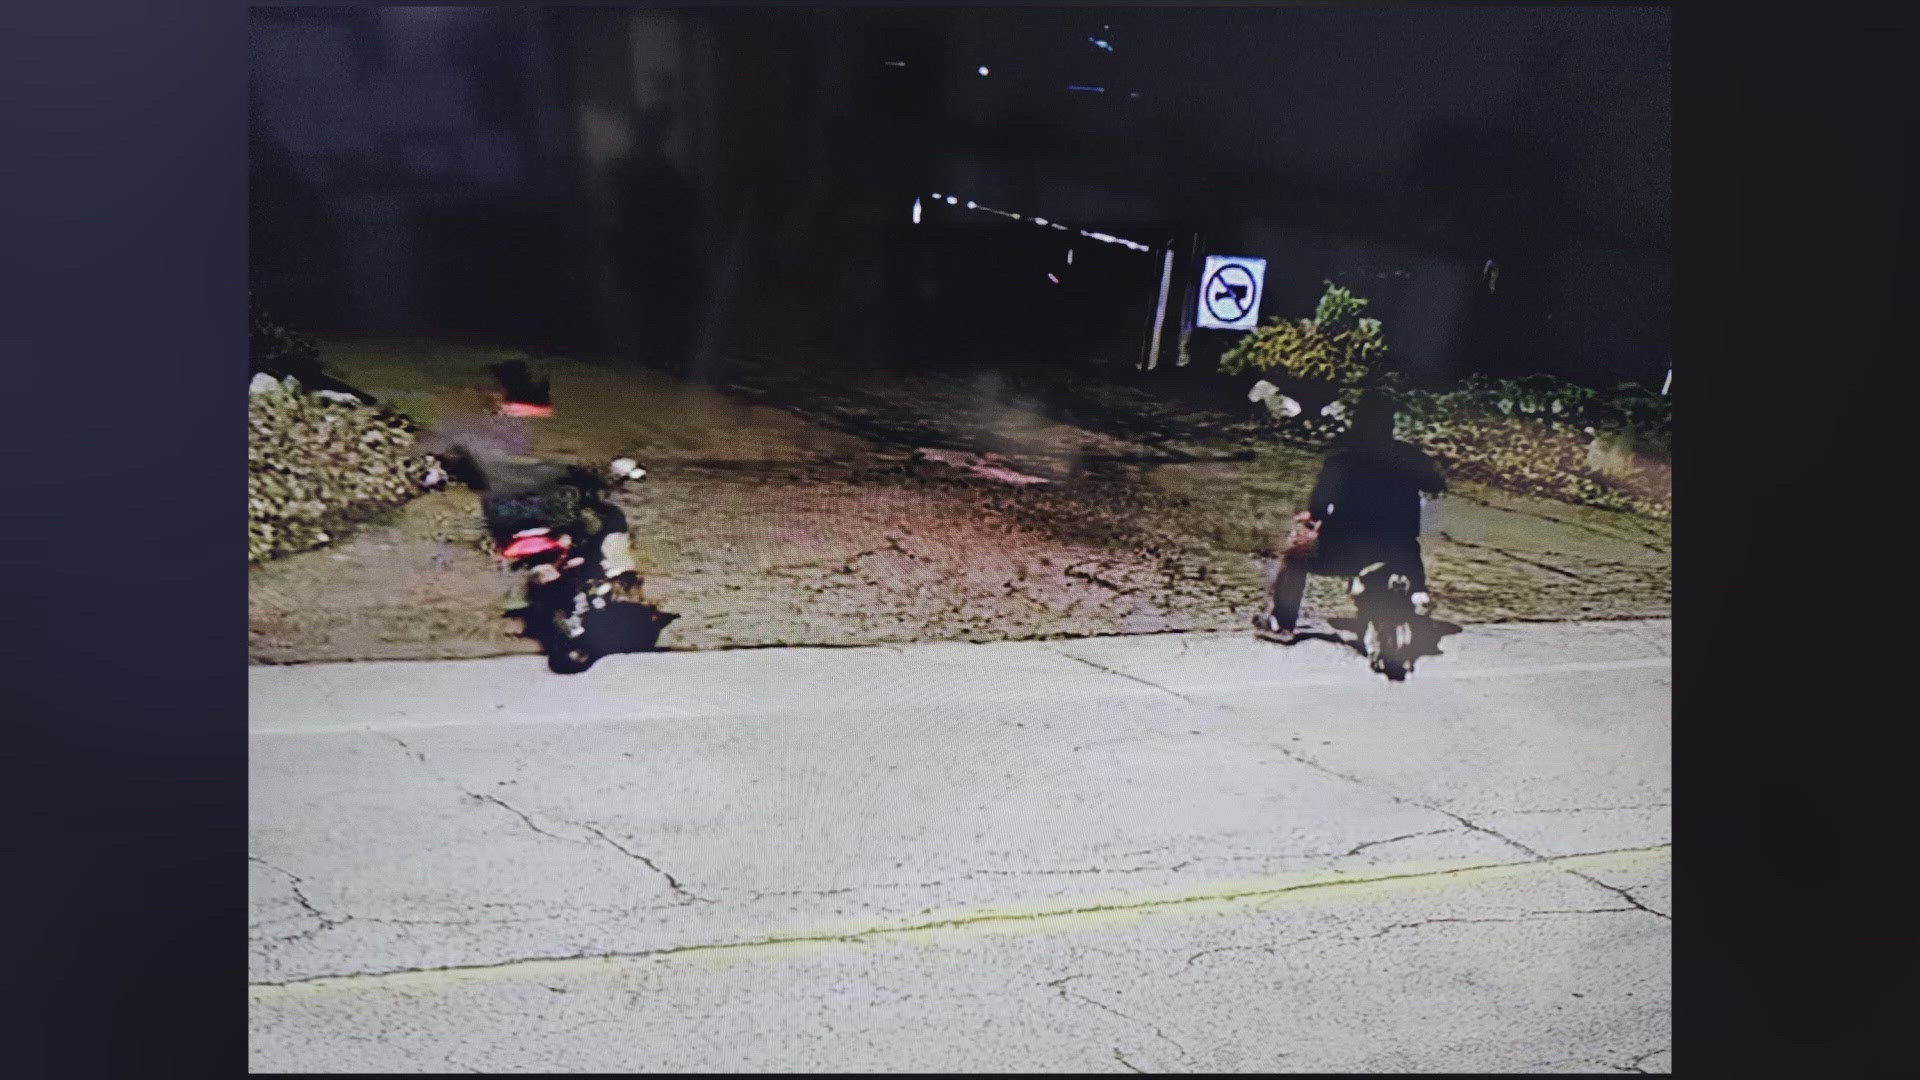 The police department is looking to identify two males seen on surveillance footage operating four-stroke dirt bikes at around 4:42 a.m. Thursday.